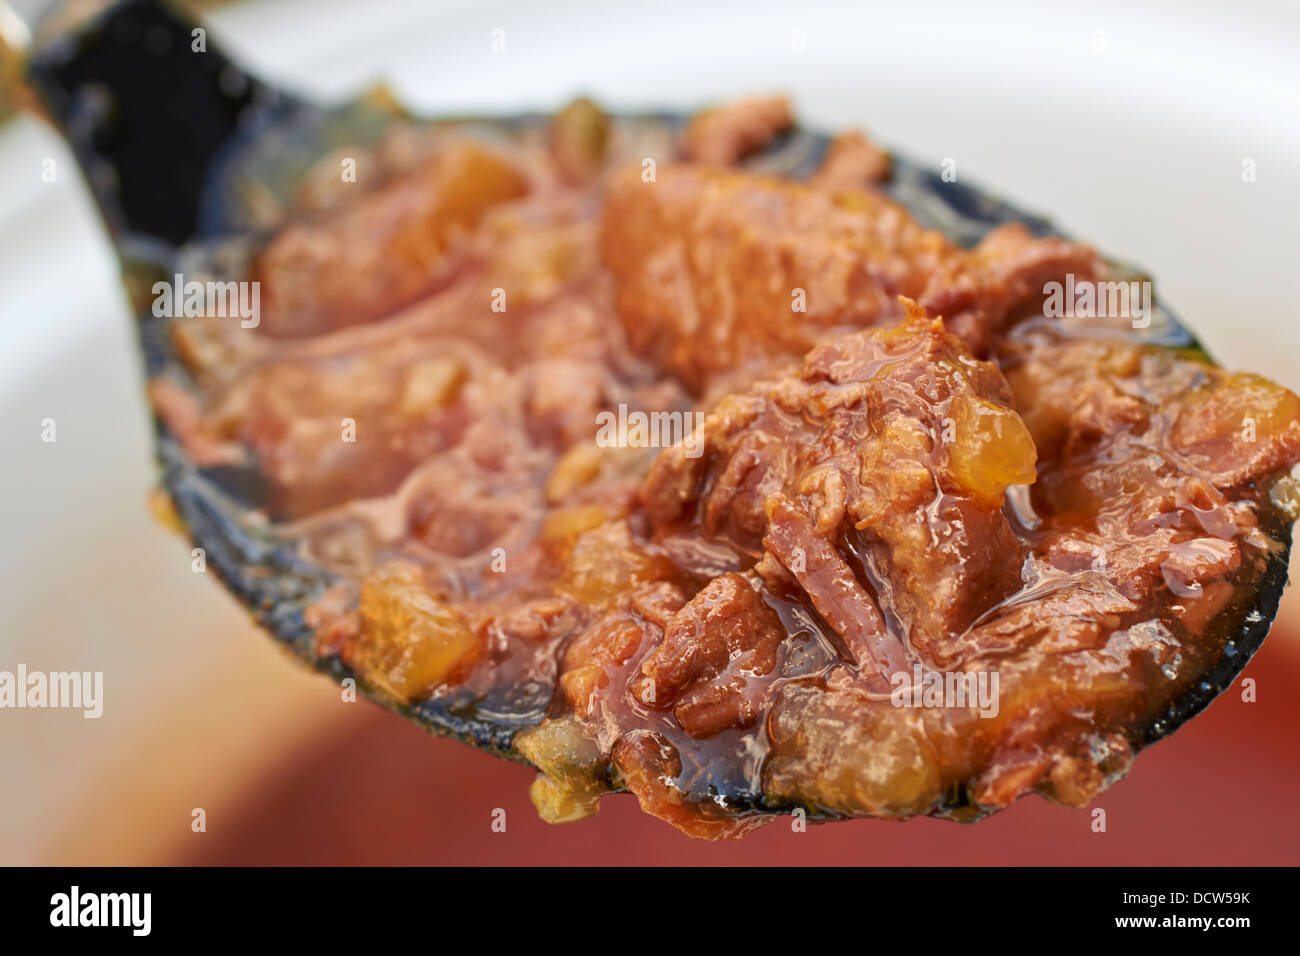 A spoonful of Armenian Goat Stew Stock Photo